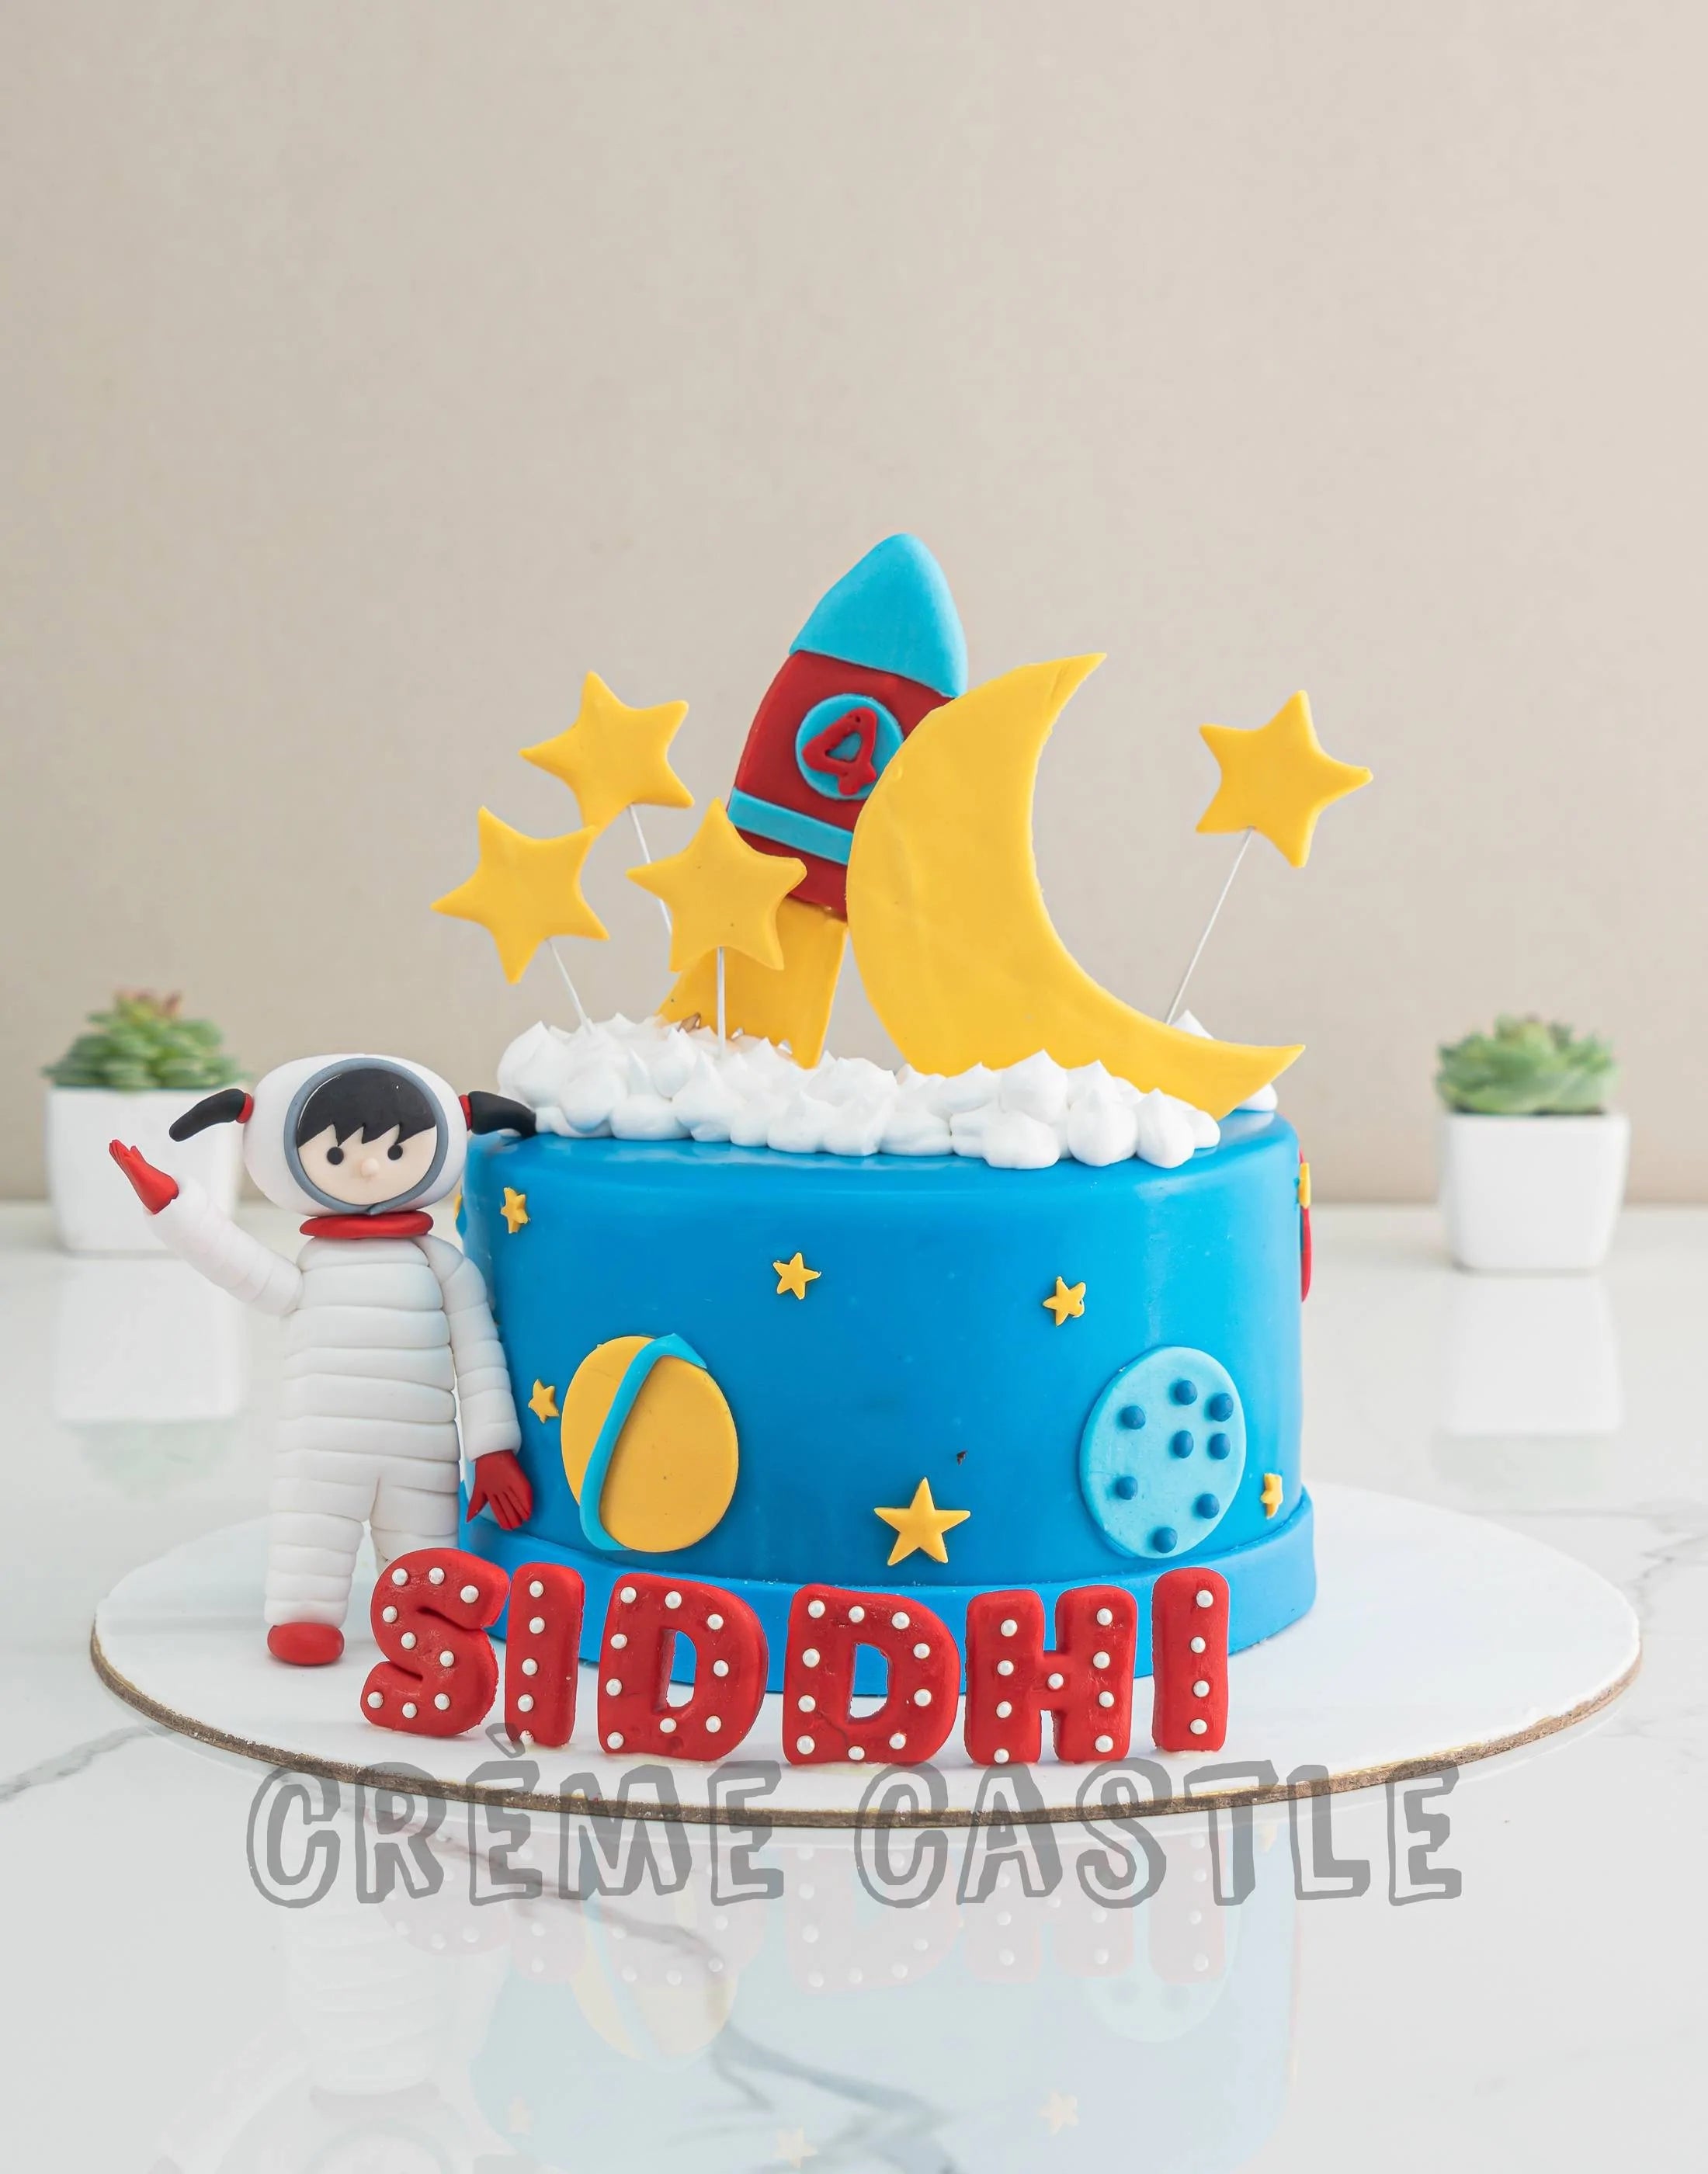 Details 160+ space themed cake toppers - awesomeenglish.edu.vn